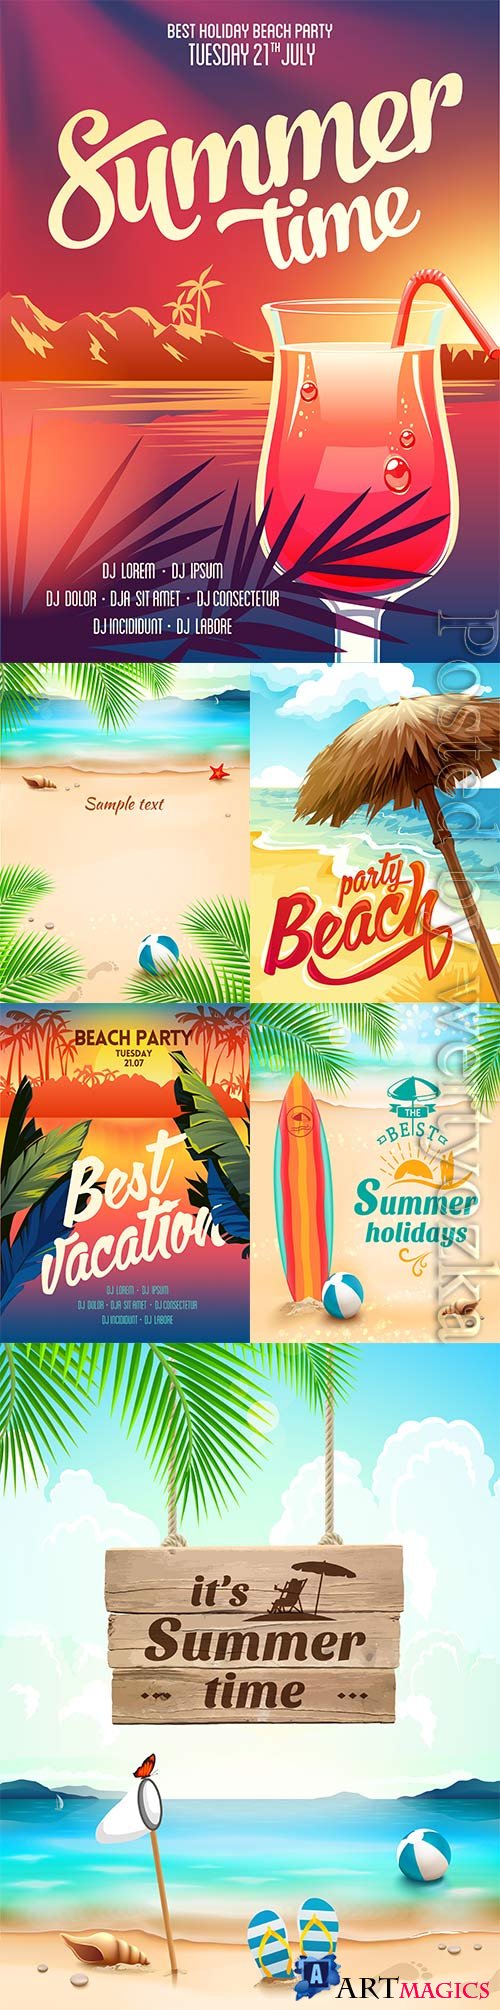 Summer vacation, sea, palm trees, cocktails in vector vol 10